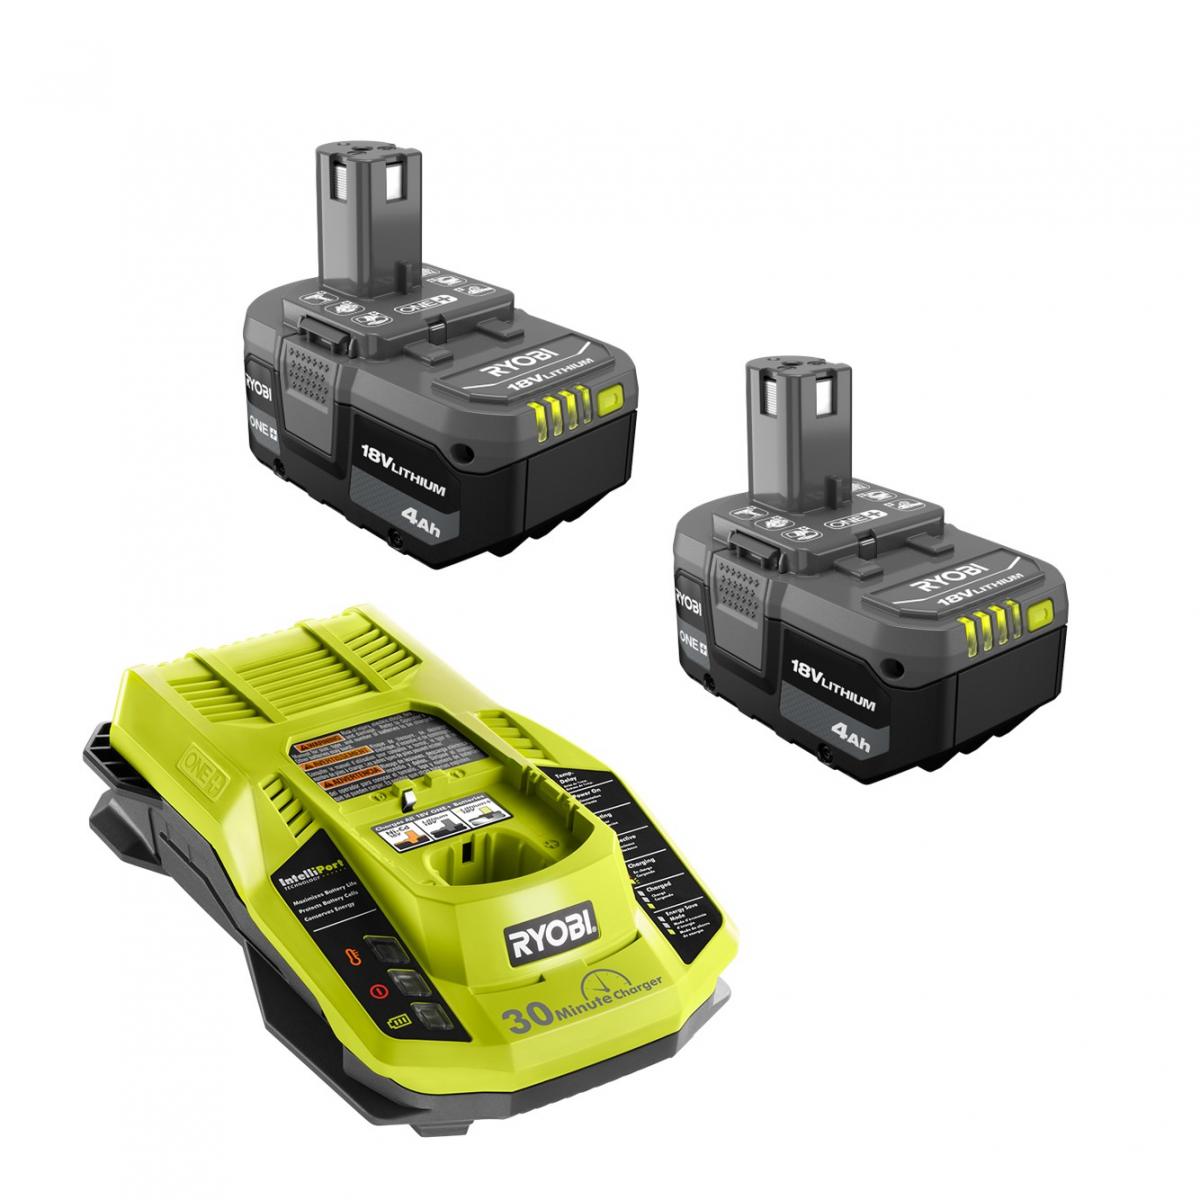 RYOBI 18V ONE+ 2-Pack 4Ah Batteries and Charger Kit (Factory Blemished) $69.99 + $13ship